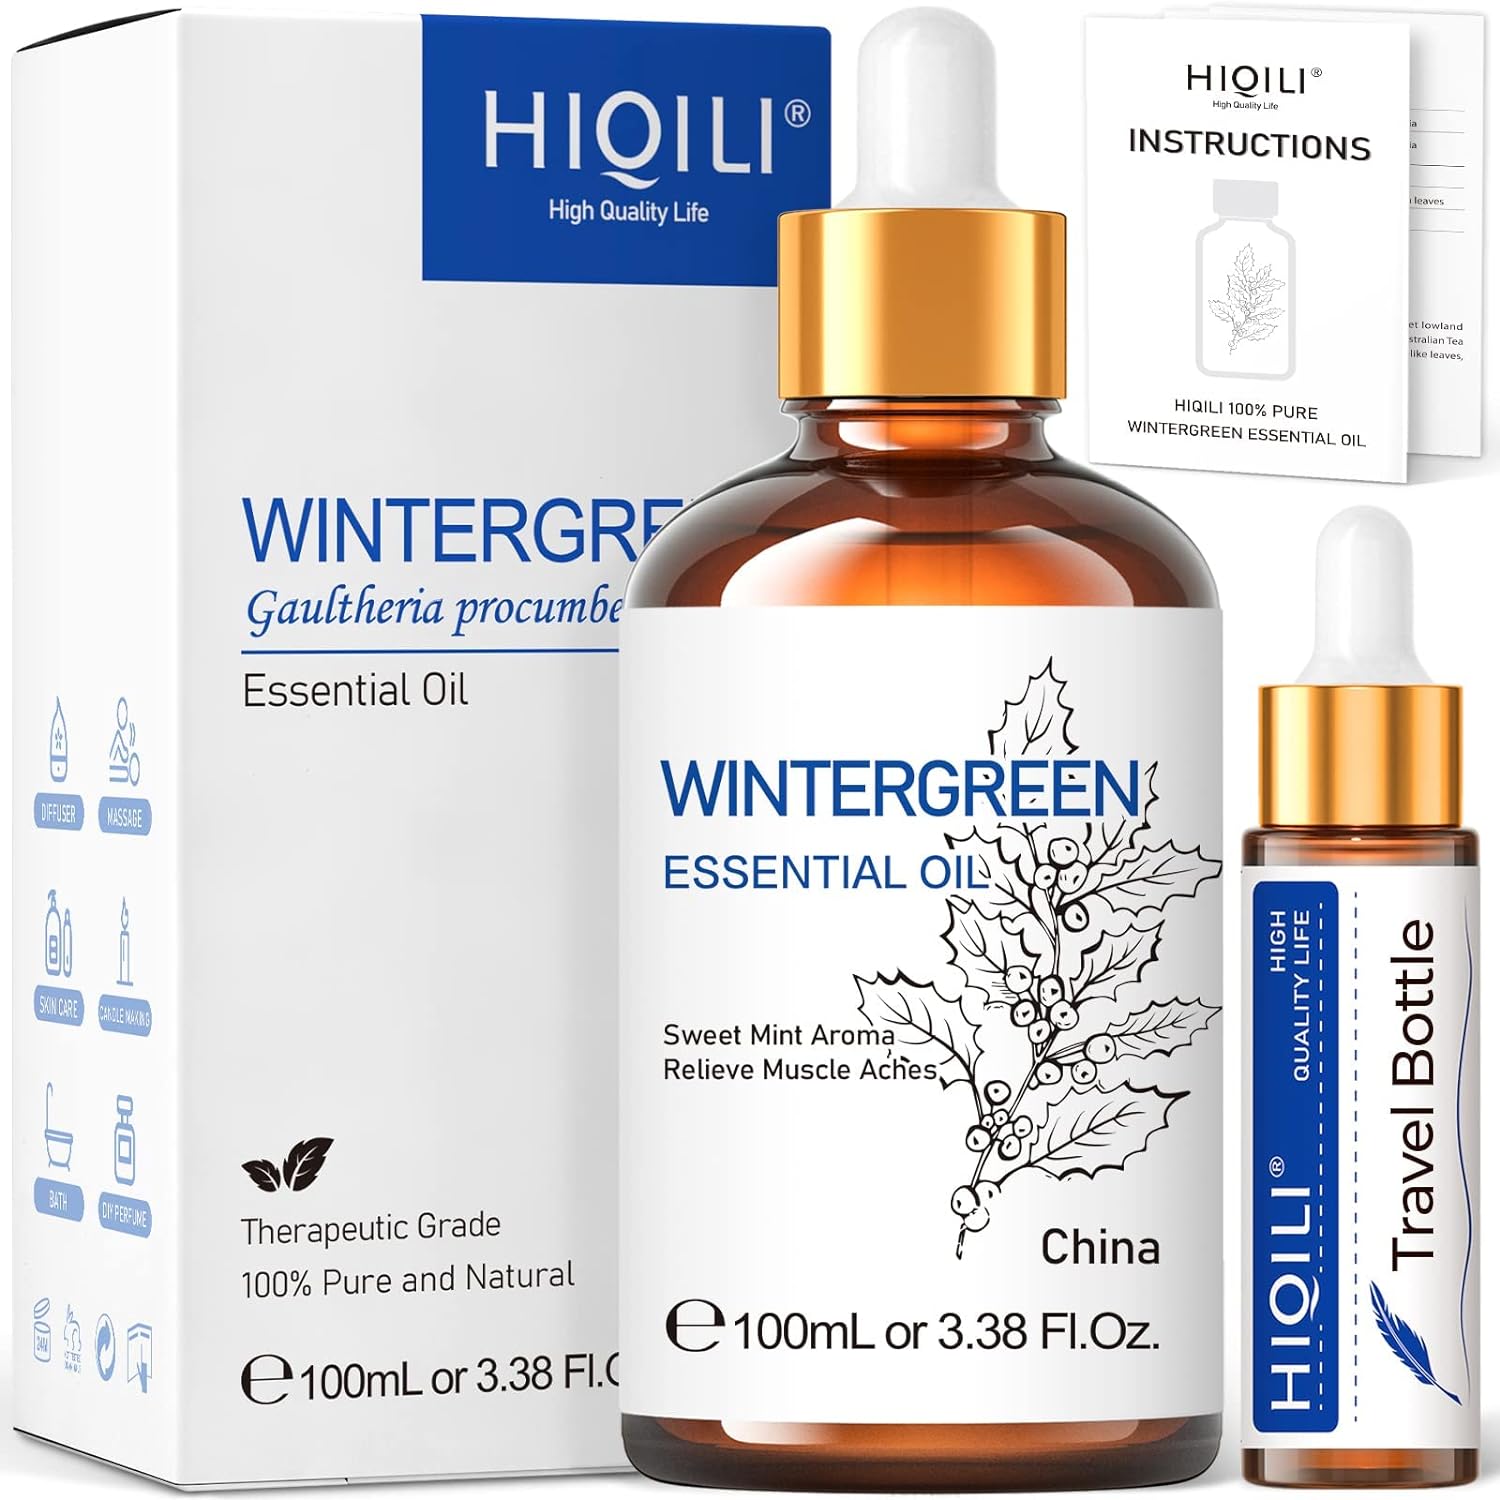 HIQILI Wintergreen Essential Oil,100% Pure Natural,for Diffuser-Inhalation Therapy - 3.38 Fl Oz